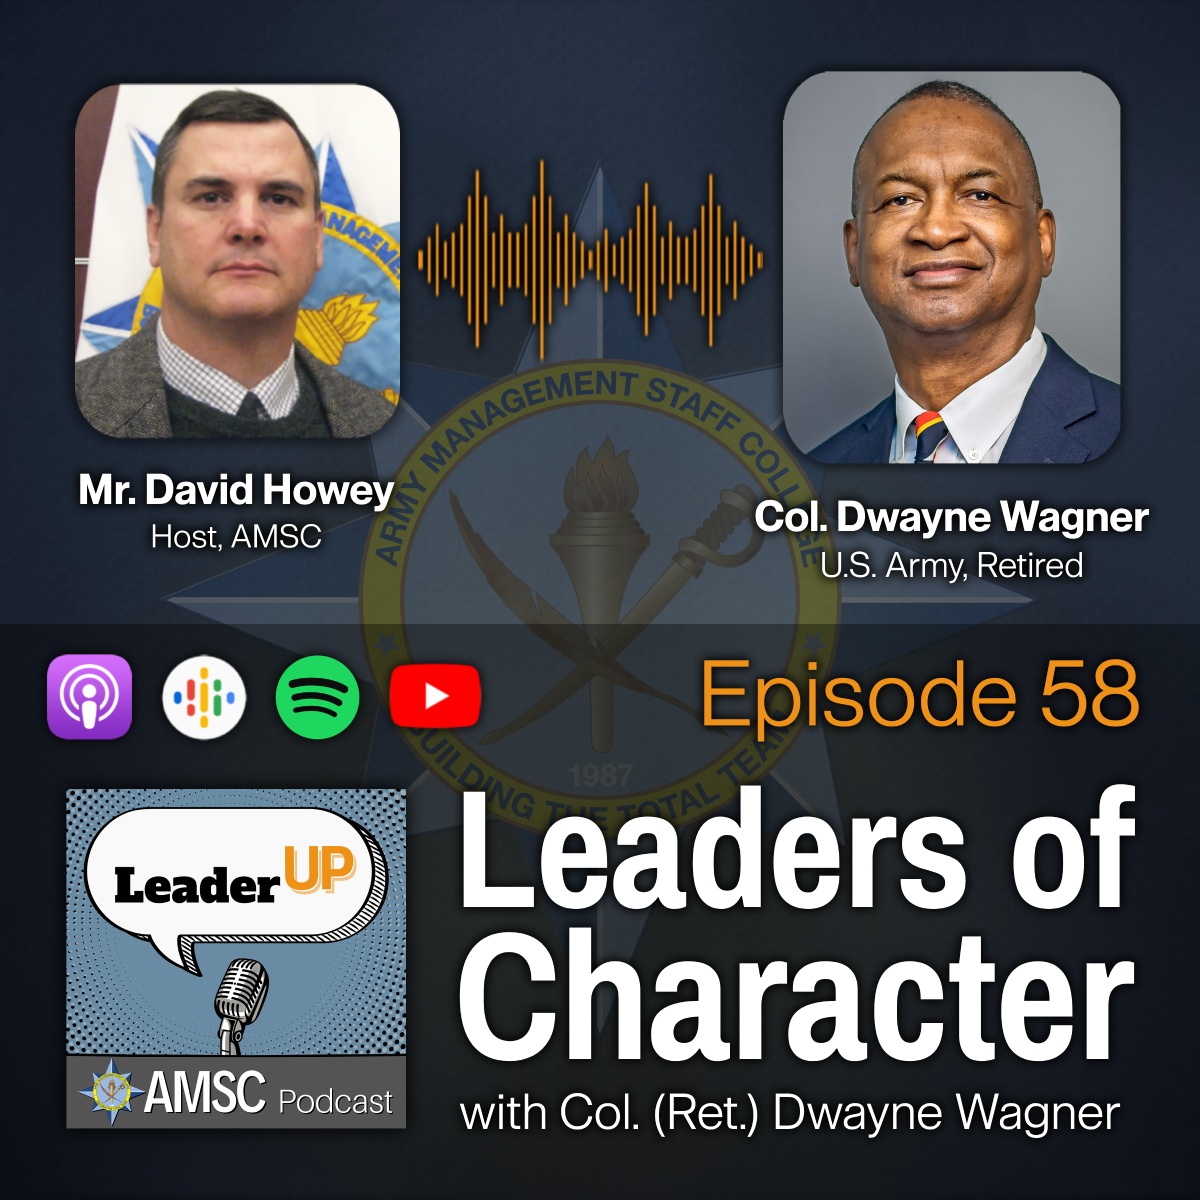 CGSC Assistant Professor, Foundation Trustee guest on “Leader Up” Podcast